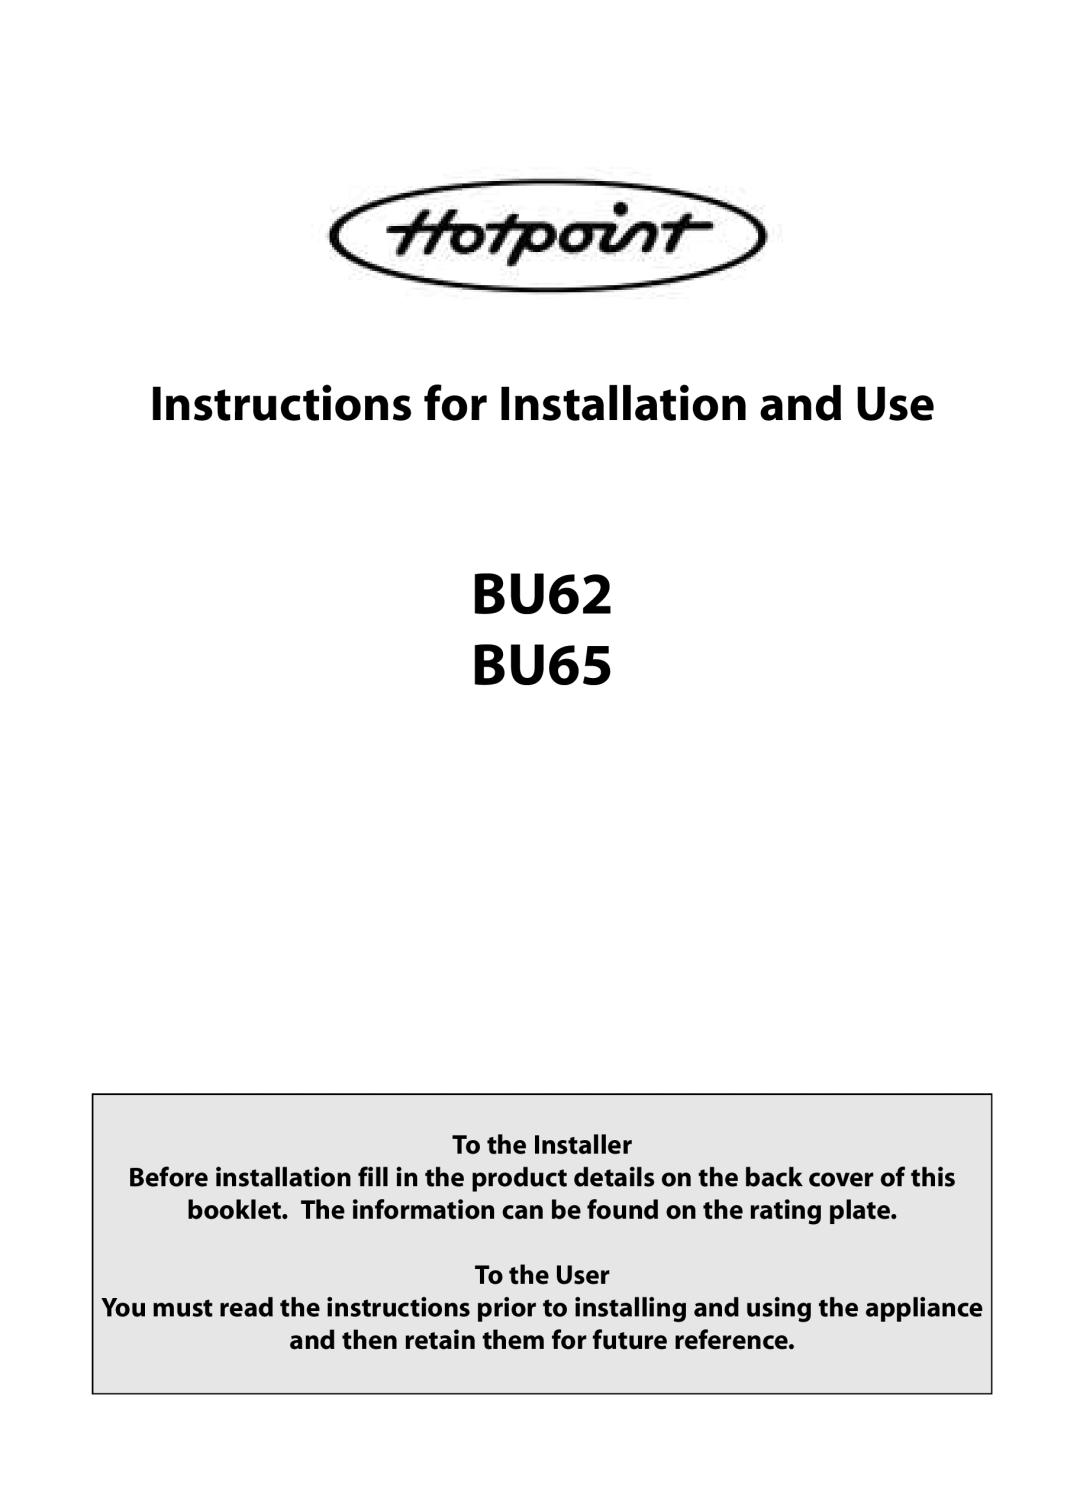 Hotpoint BU62 BU65 manual Instructions for Installation and Use, To the Installer 